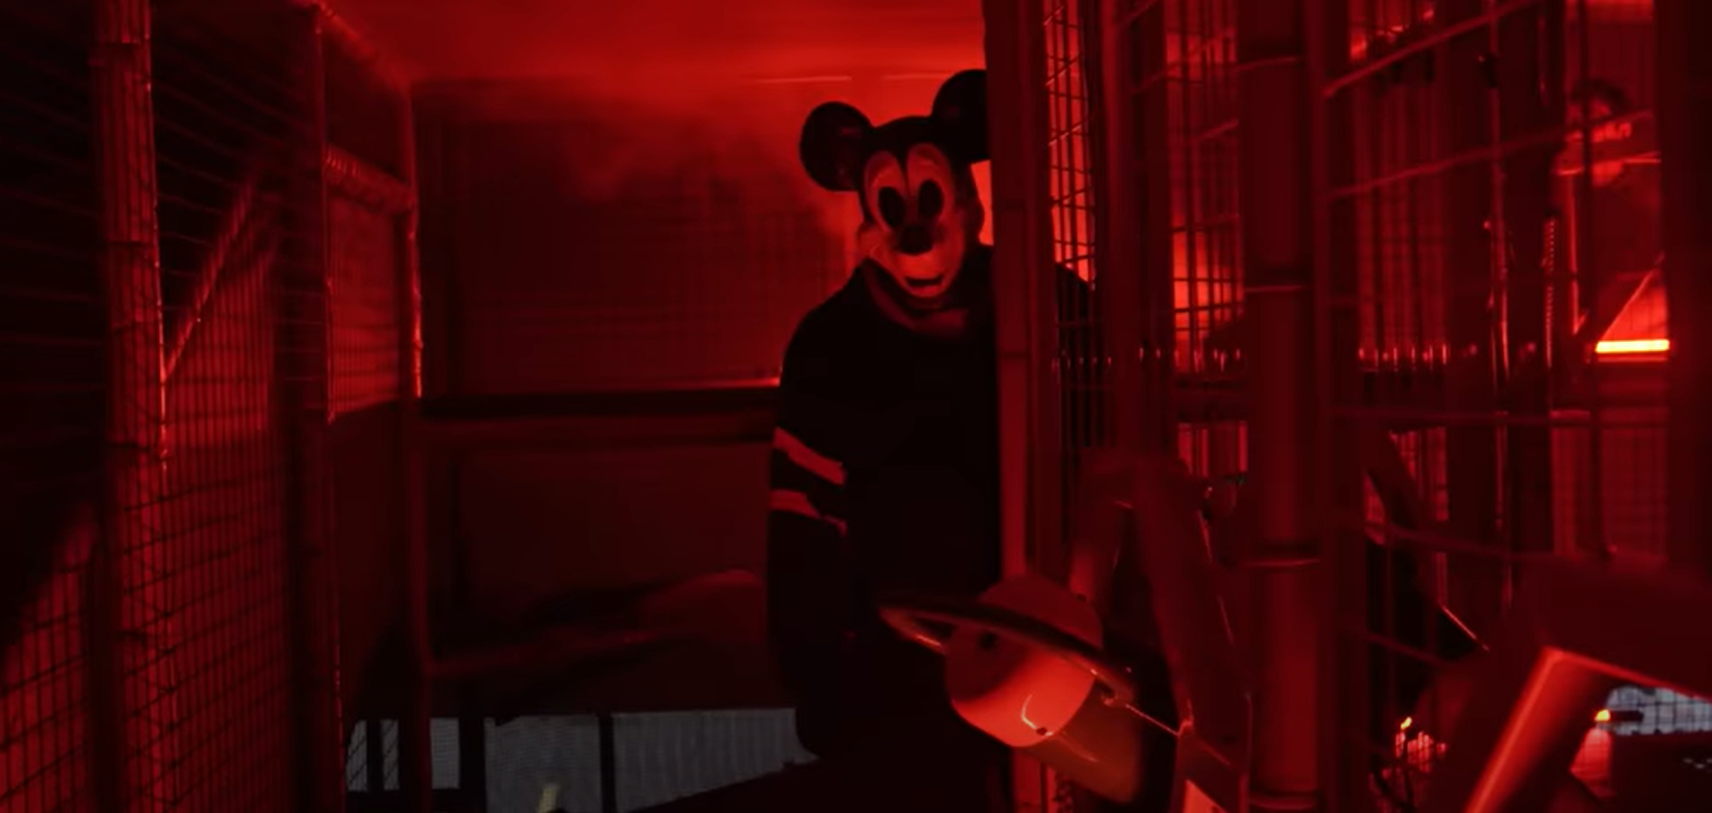 A Mickey Mouse Horror Movie Is Coming Out This Year as the Iconic Disney Character Enters Public Domain